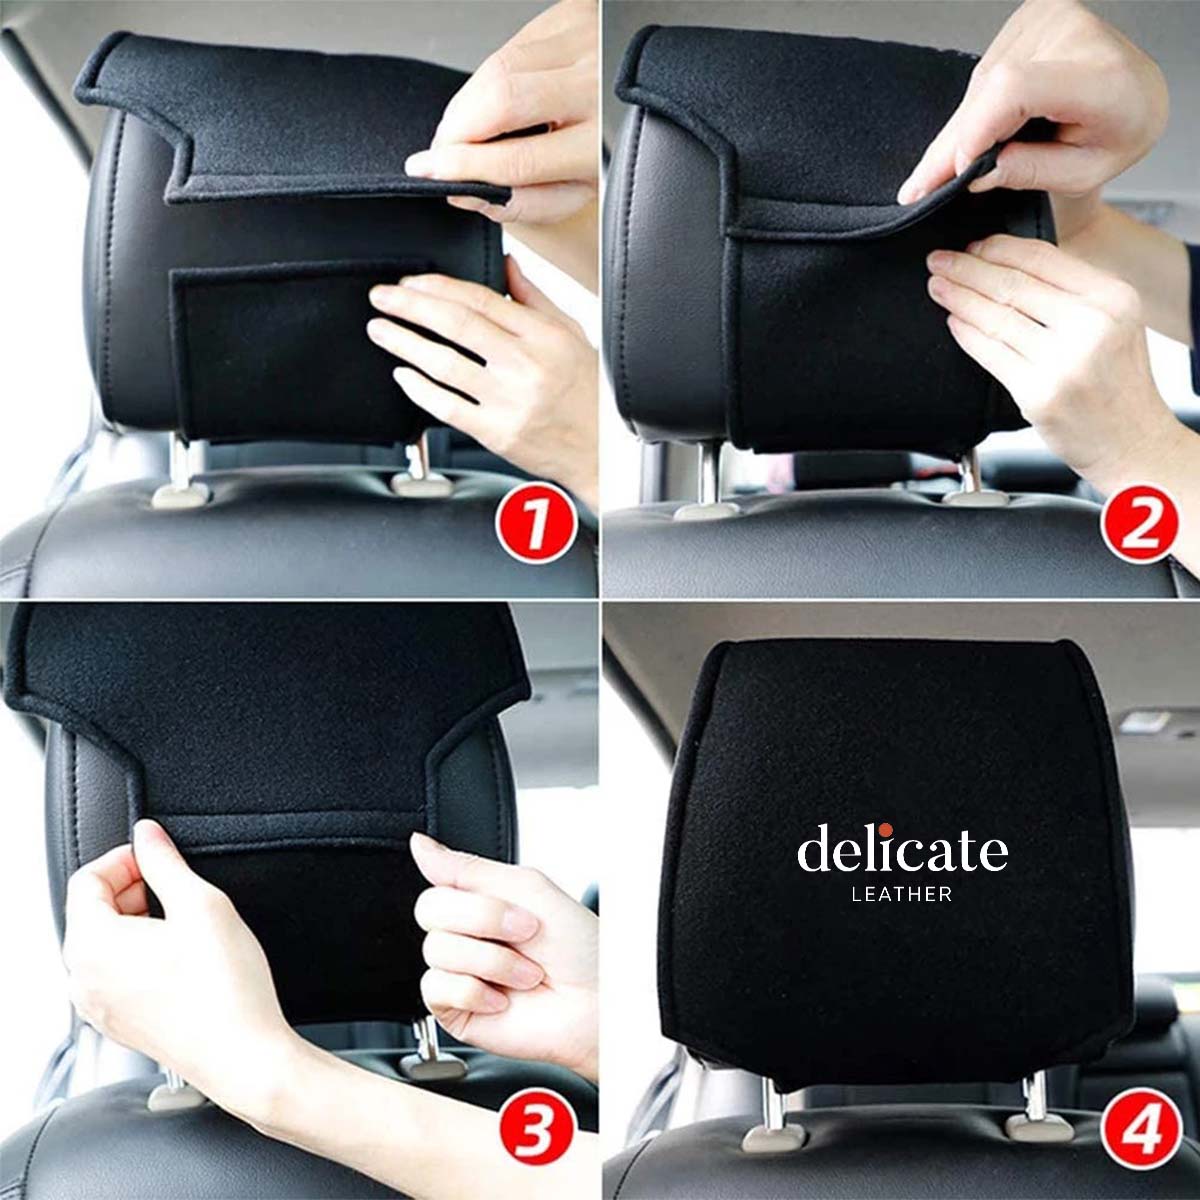 Delicate Leather Car Seat Headrest Cover Breathable Flexible Headrest Covers Velcro Auto Headrest Covers Universal Fit, Custom For Your Cars, Car Accessories TY13998 - Delicate Leather